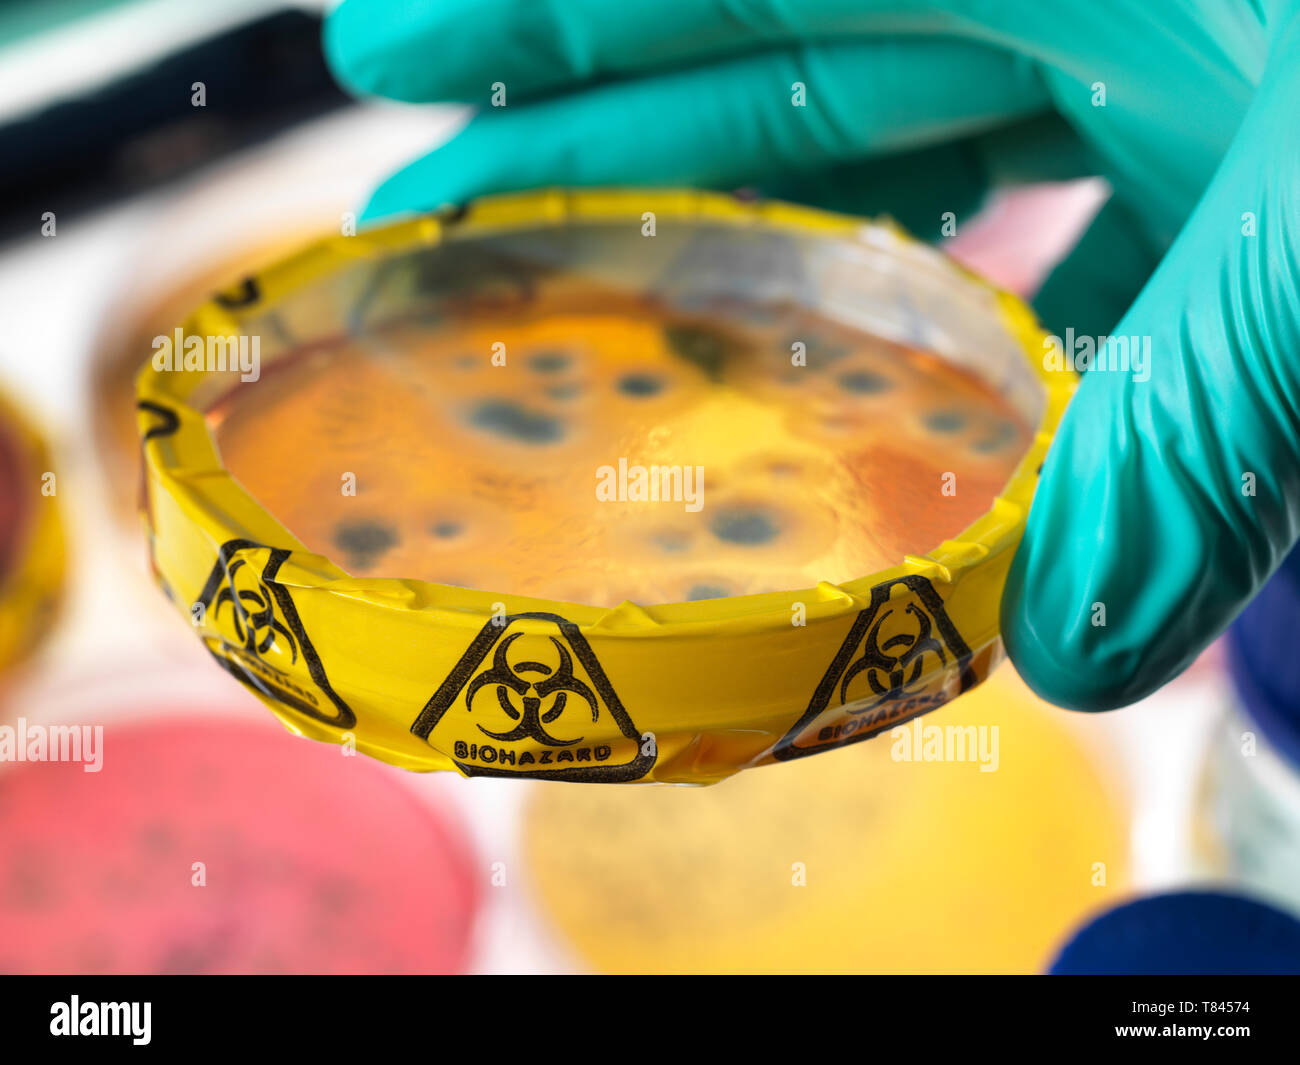 Microbiology Experiment, Scientist viewing microorganisms in bacterial cultures growing in petri dishes in the laboratory, close up of hand Stock Photo